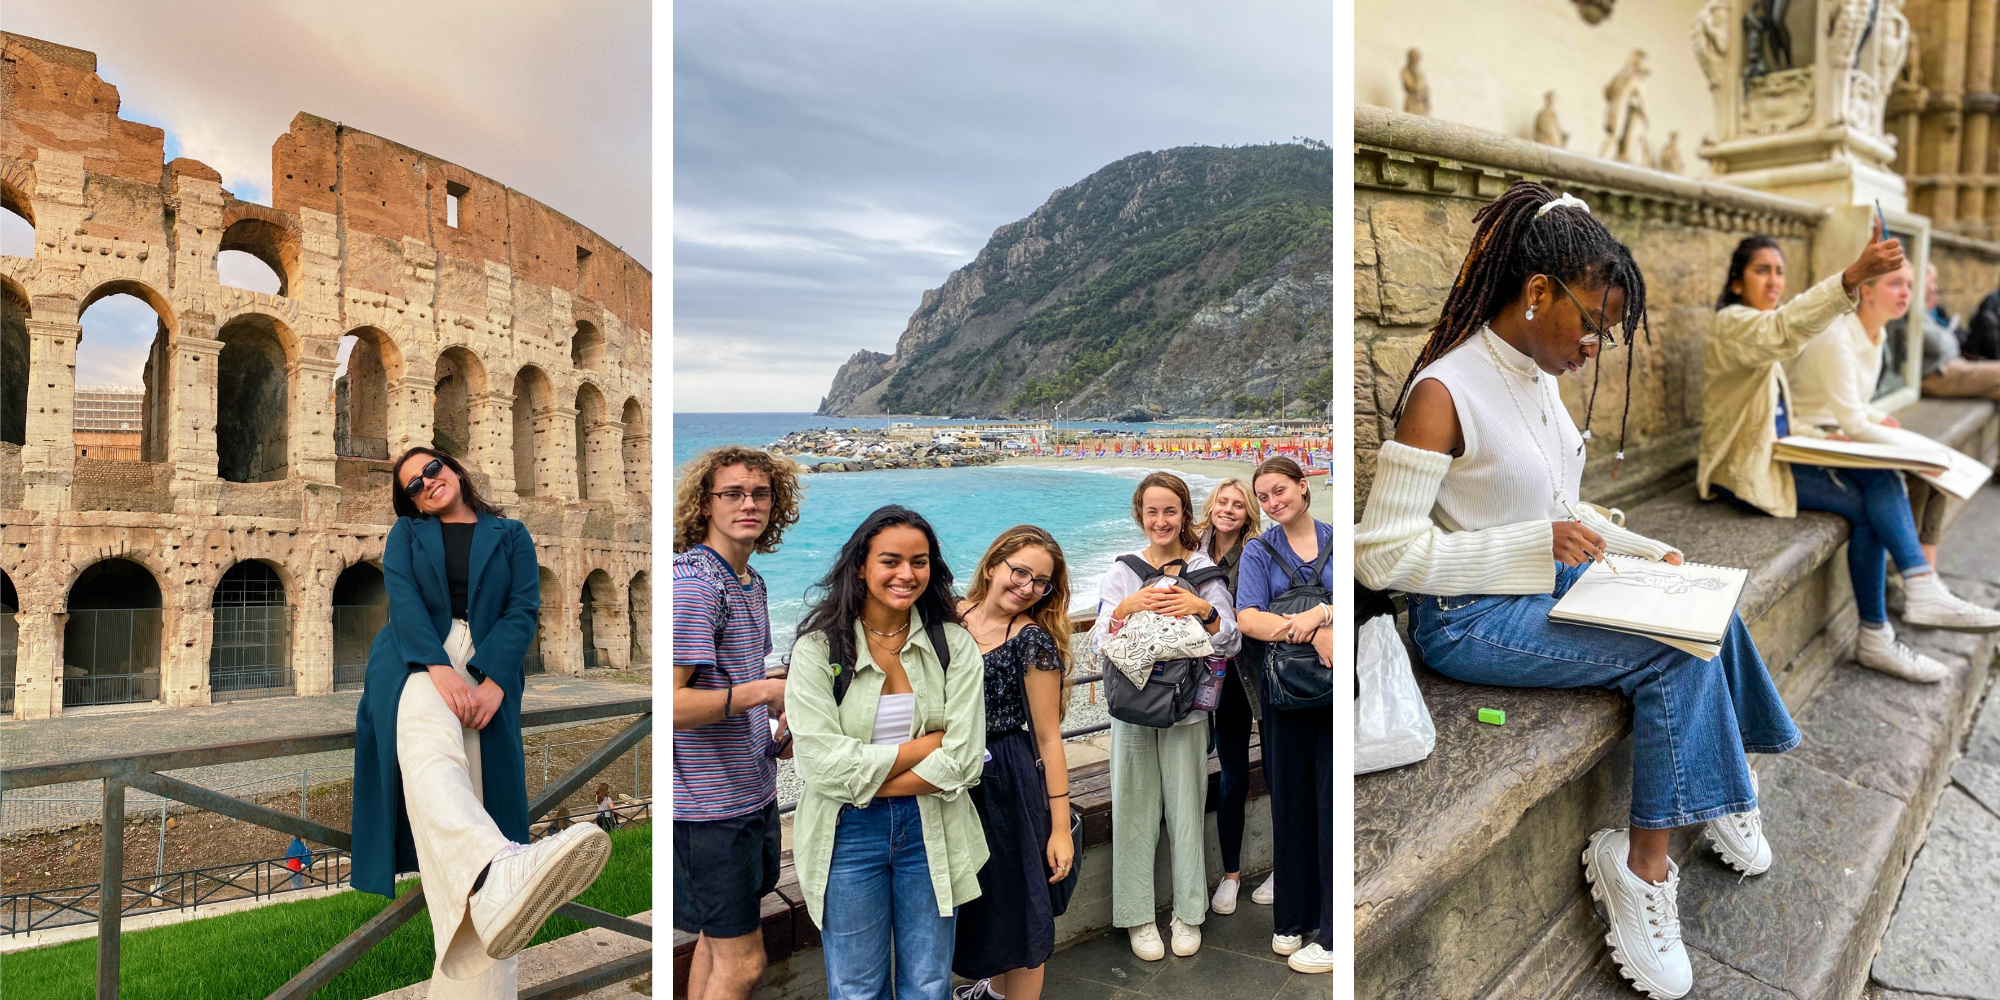 Students posing behind backdrops in Rome and Cinque Terre.